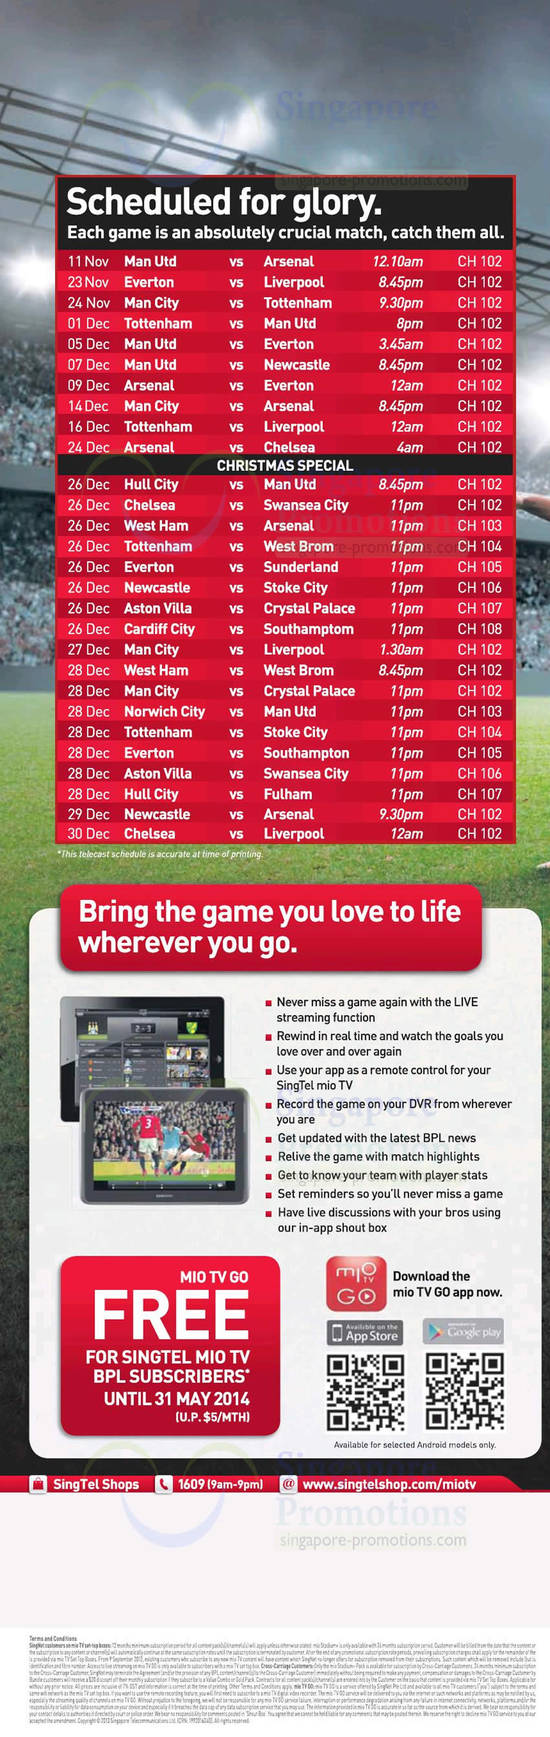 Matches, Free Mio TV Go For BPL Subscribers